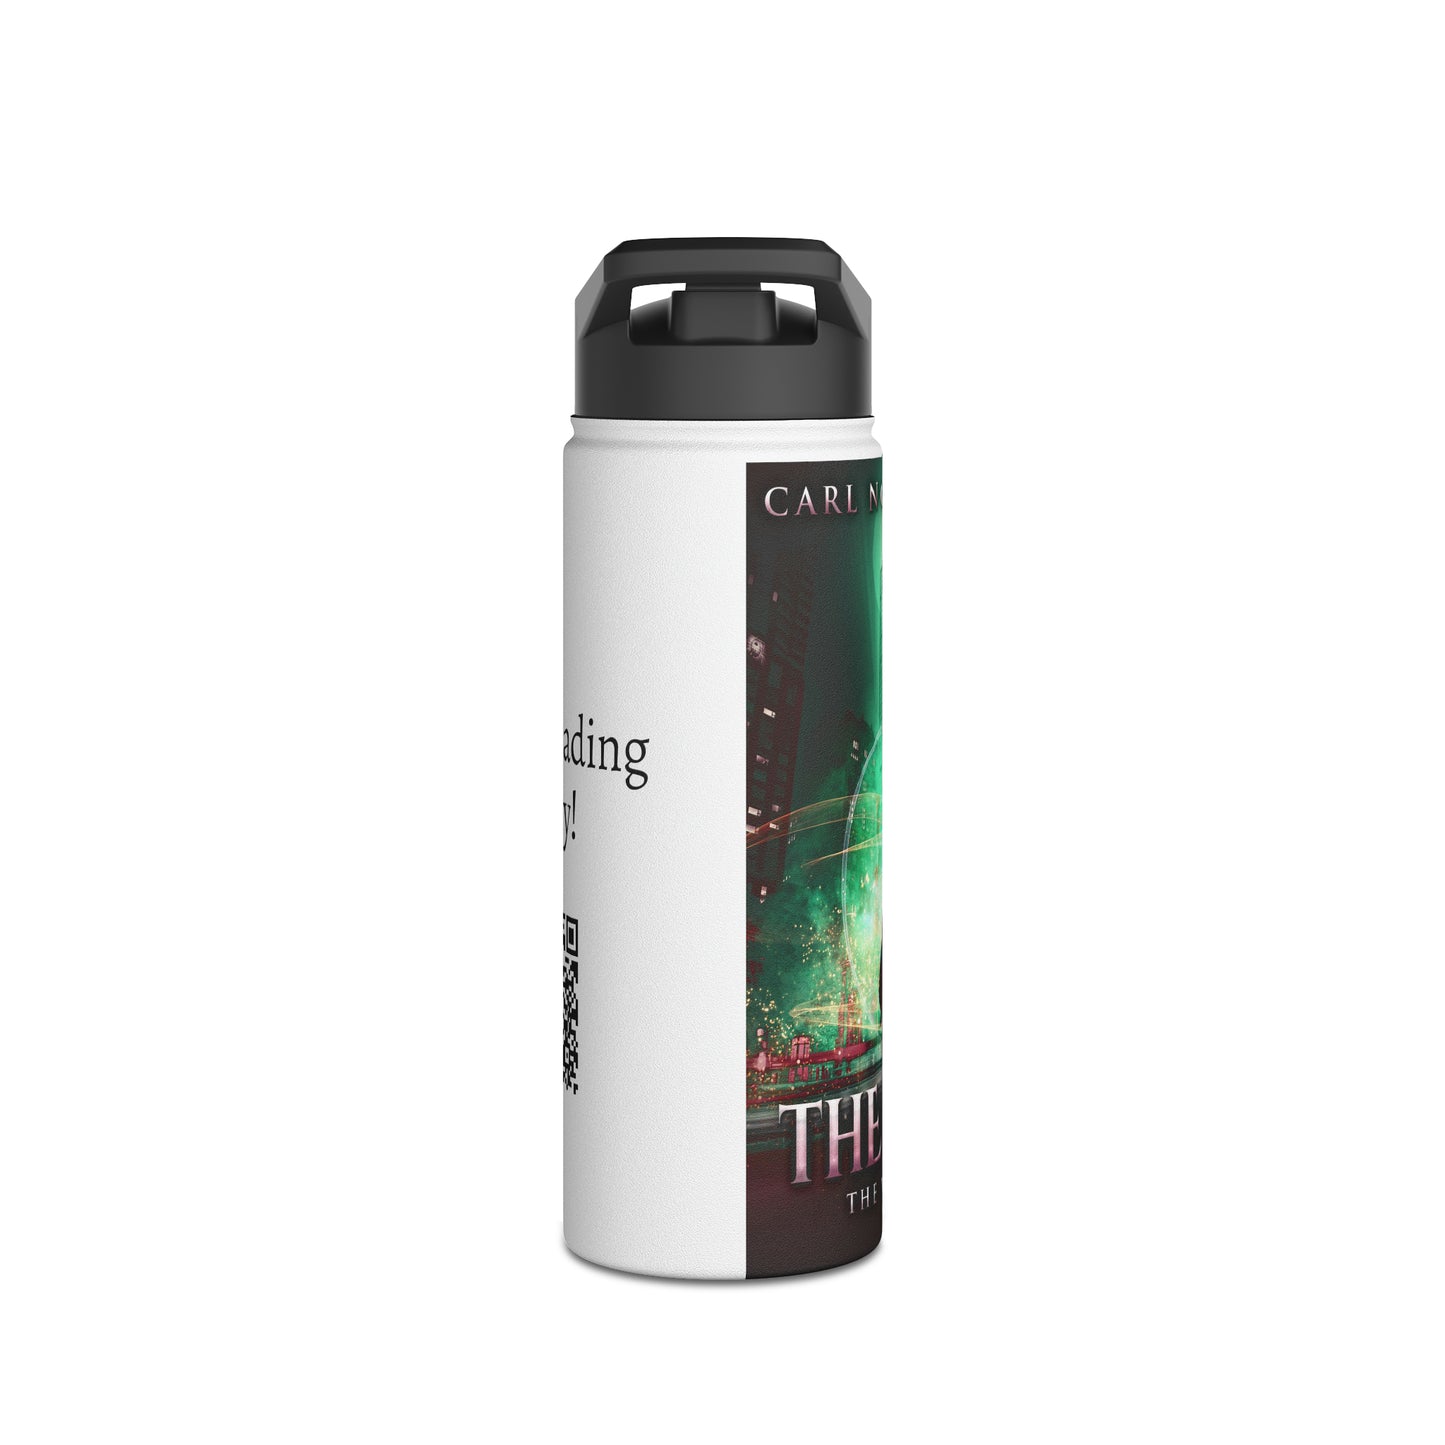 The Tomb - Stainless Steel Water Bottle